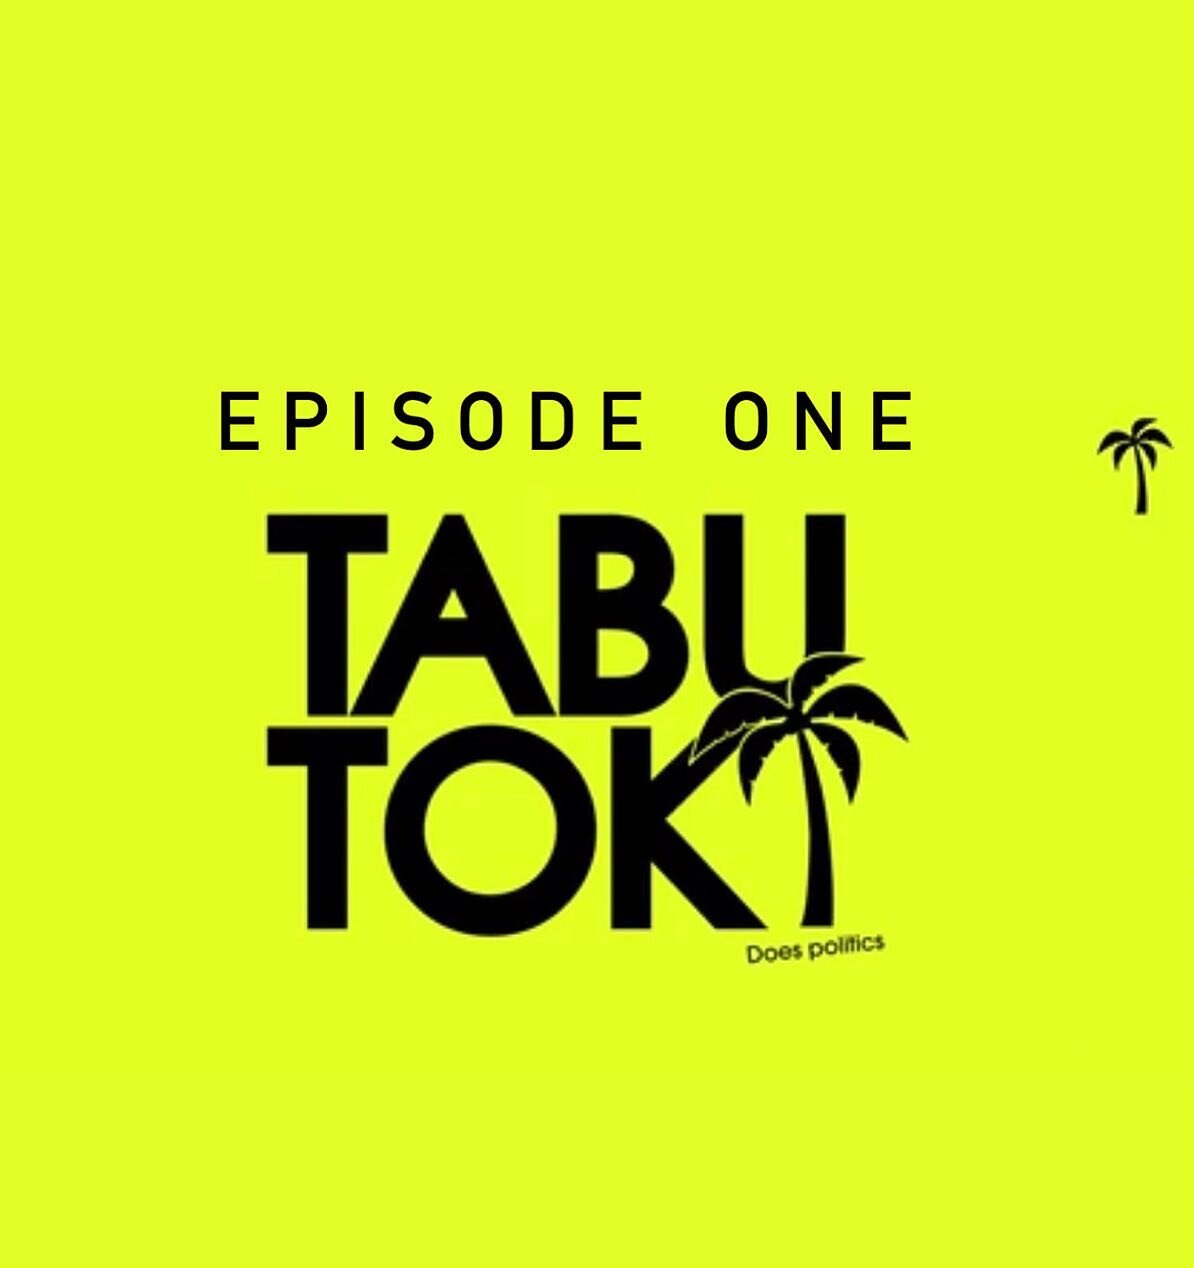 What do we know about Elections? Episode 1 in our Political series is LIVE NOW !!! Vinaka vakalevu to our guests @matildapoasa @raysalakaia and @_tinatiller_ 😉

Head to our website www.tabutok.com to watch our introductory episode with some Election